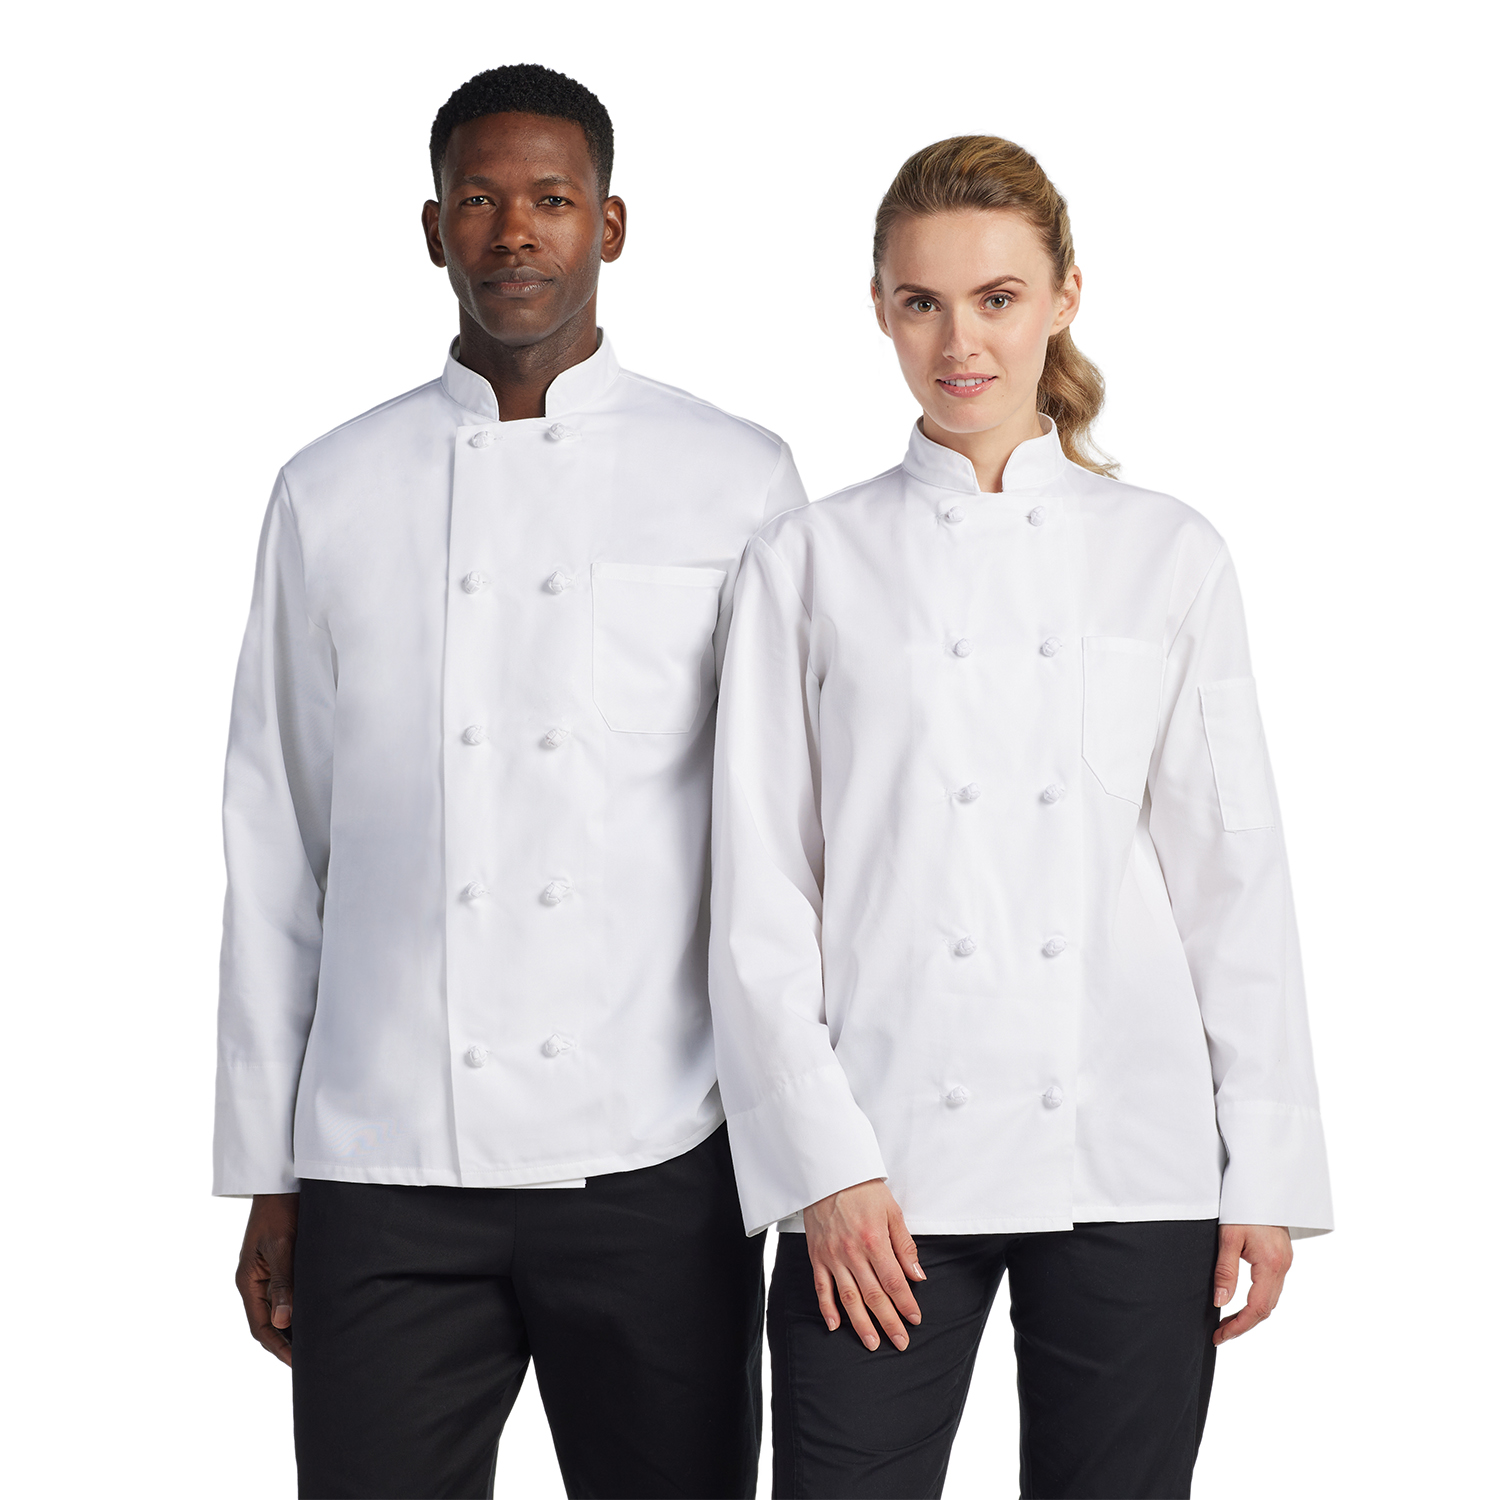 Pub Cafe Kitchen BE THE CHEF Simple Classic Long Sleeve White Chef Coat Jacket with Cloth-knot Buttons for Restaurant 